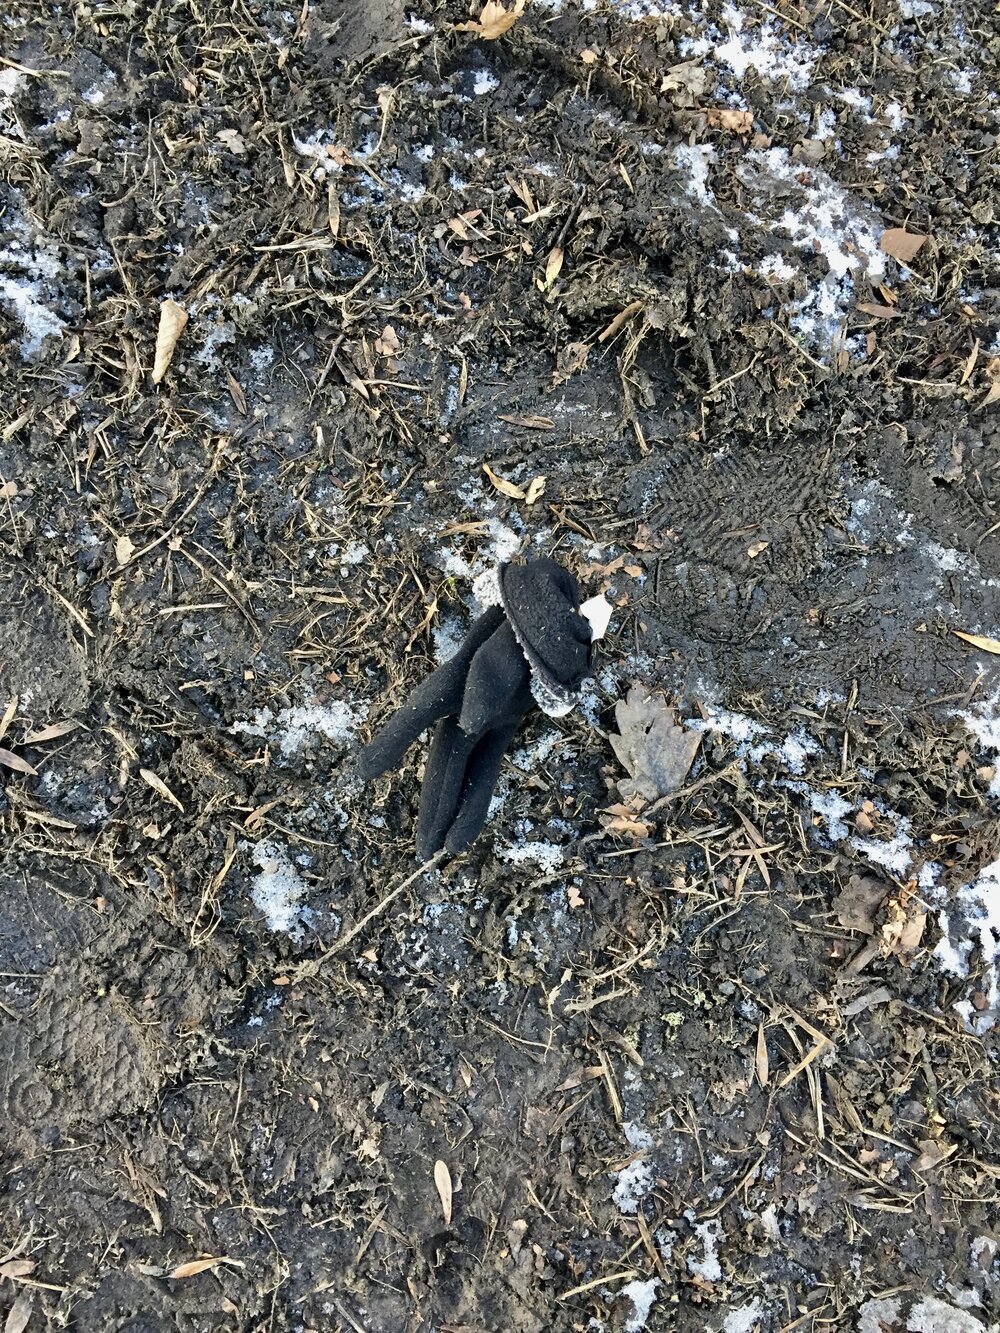  A pair of black gloves folder together, sitting in the mud. 